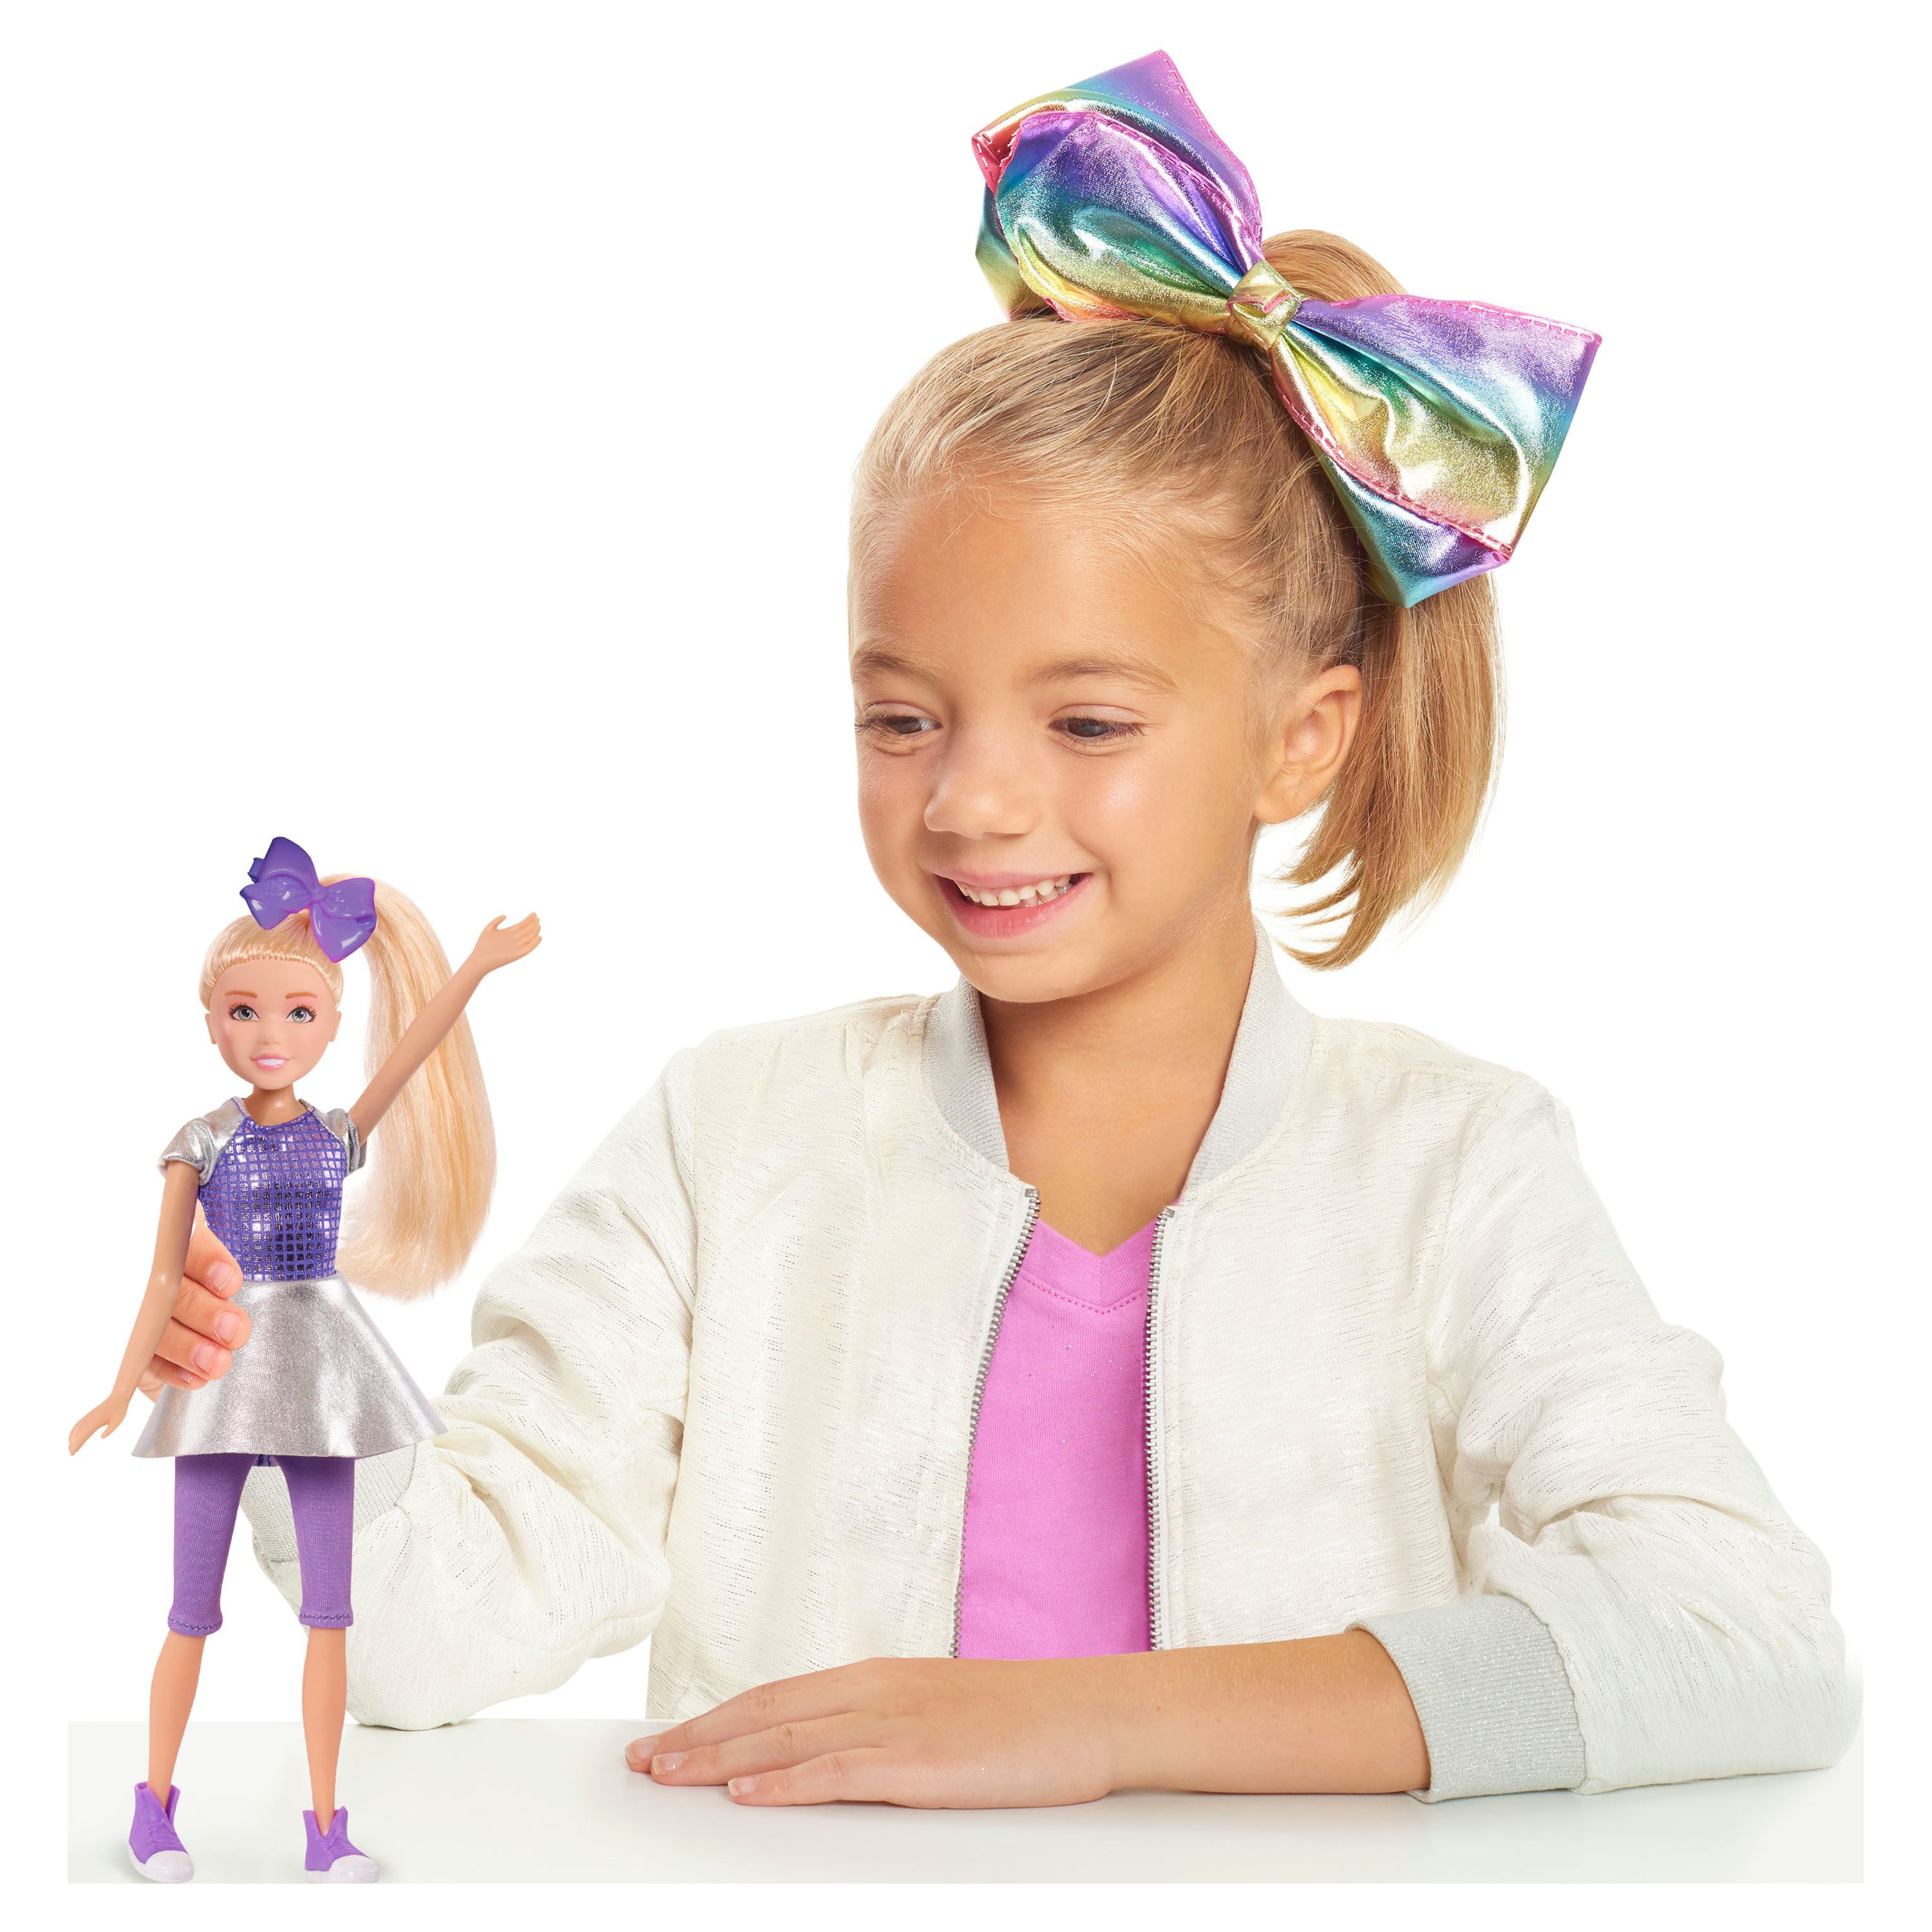 JoJo Siwa Fashion Doll, Out of this World, 10-inch doll,  Kids Toys for Ages 3 Up, Gifts and Presents - image 2 of 3